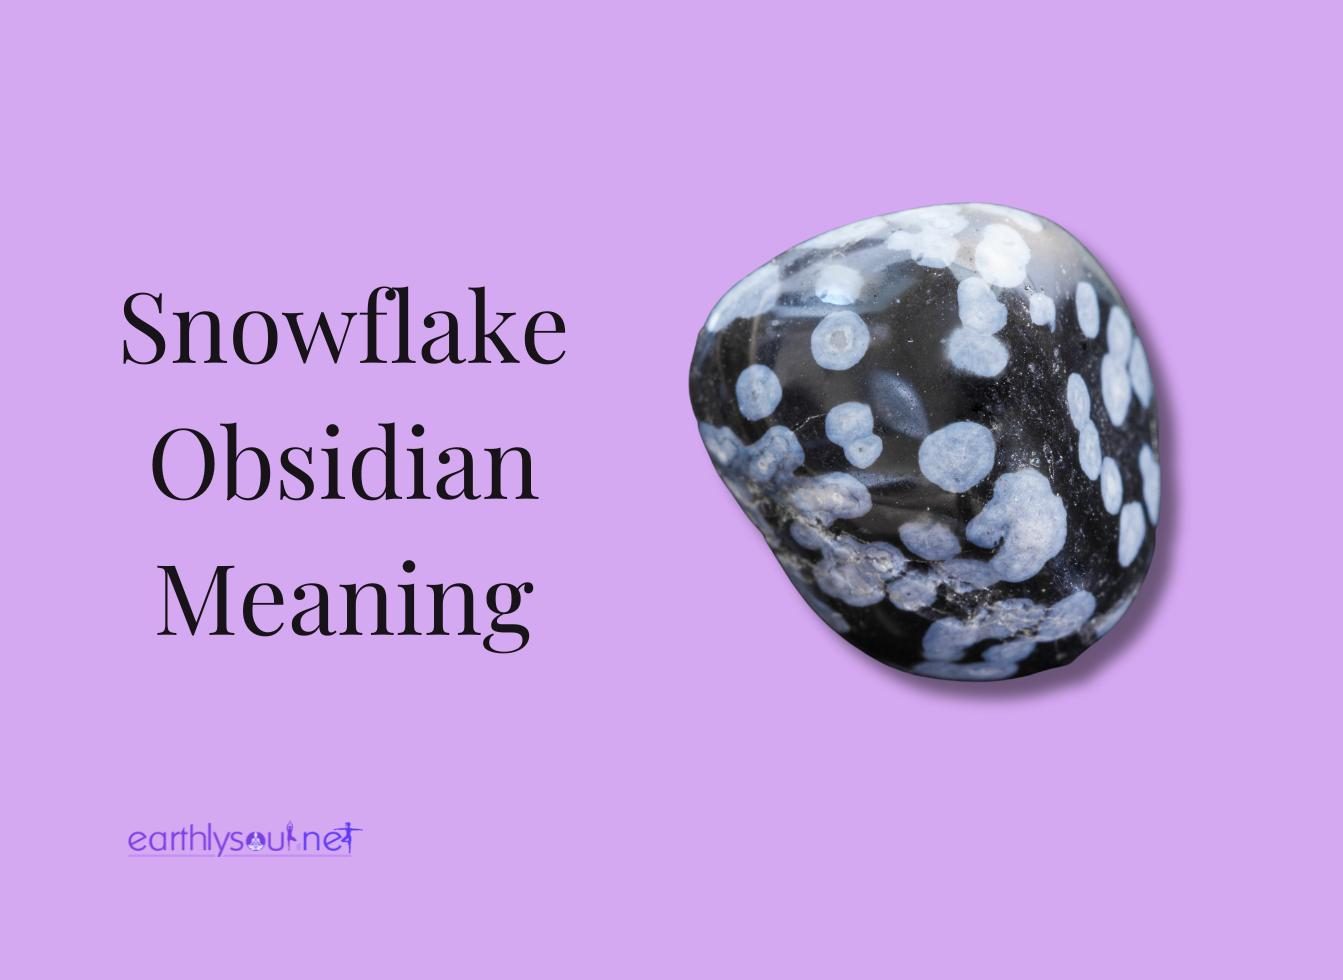 Snowflake obsidian meaning and photo of the stone